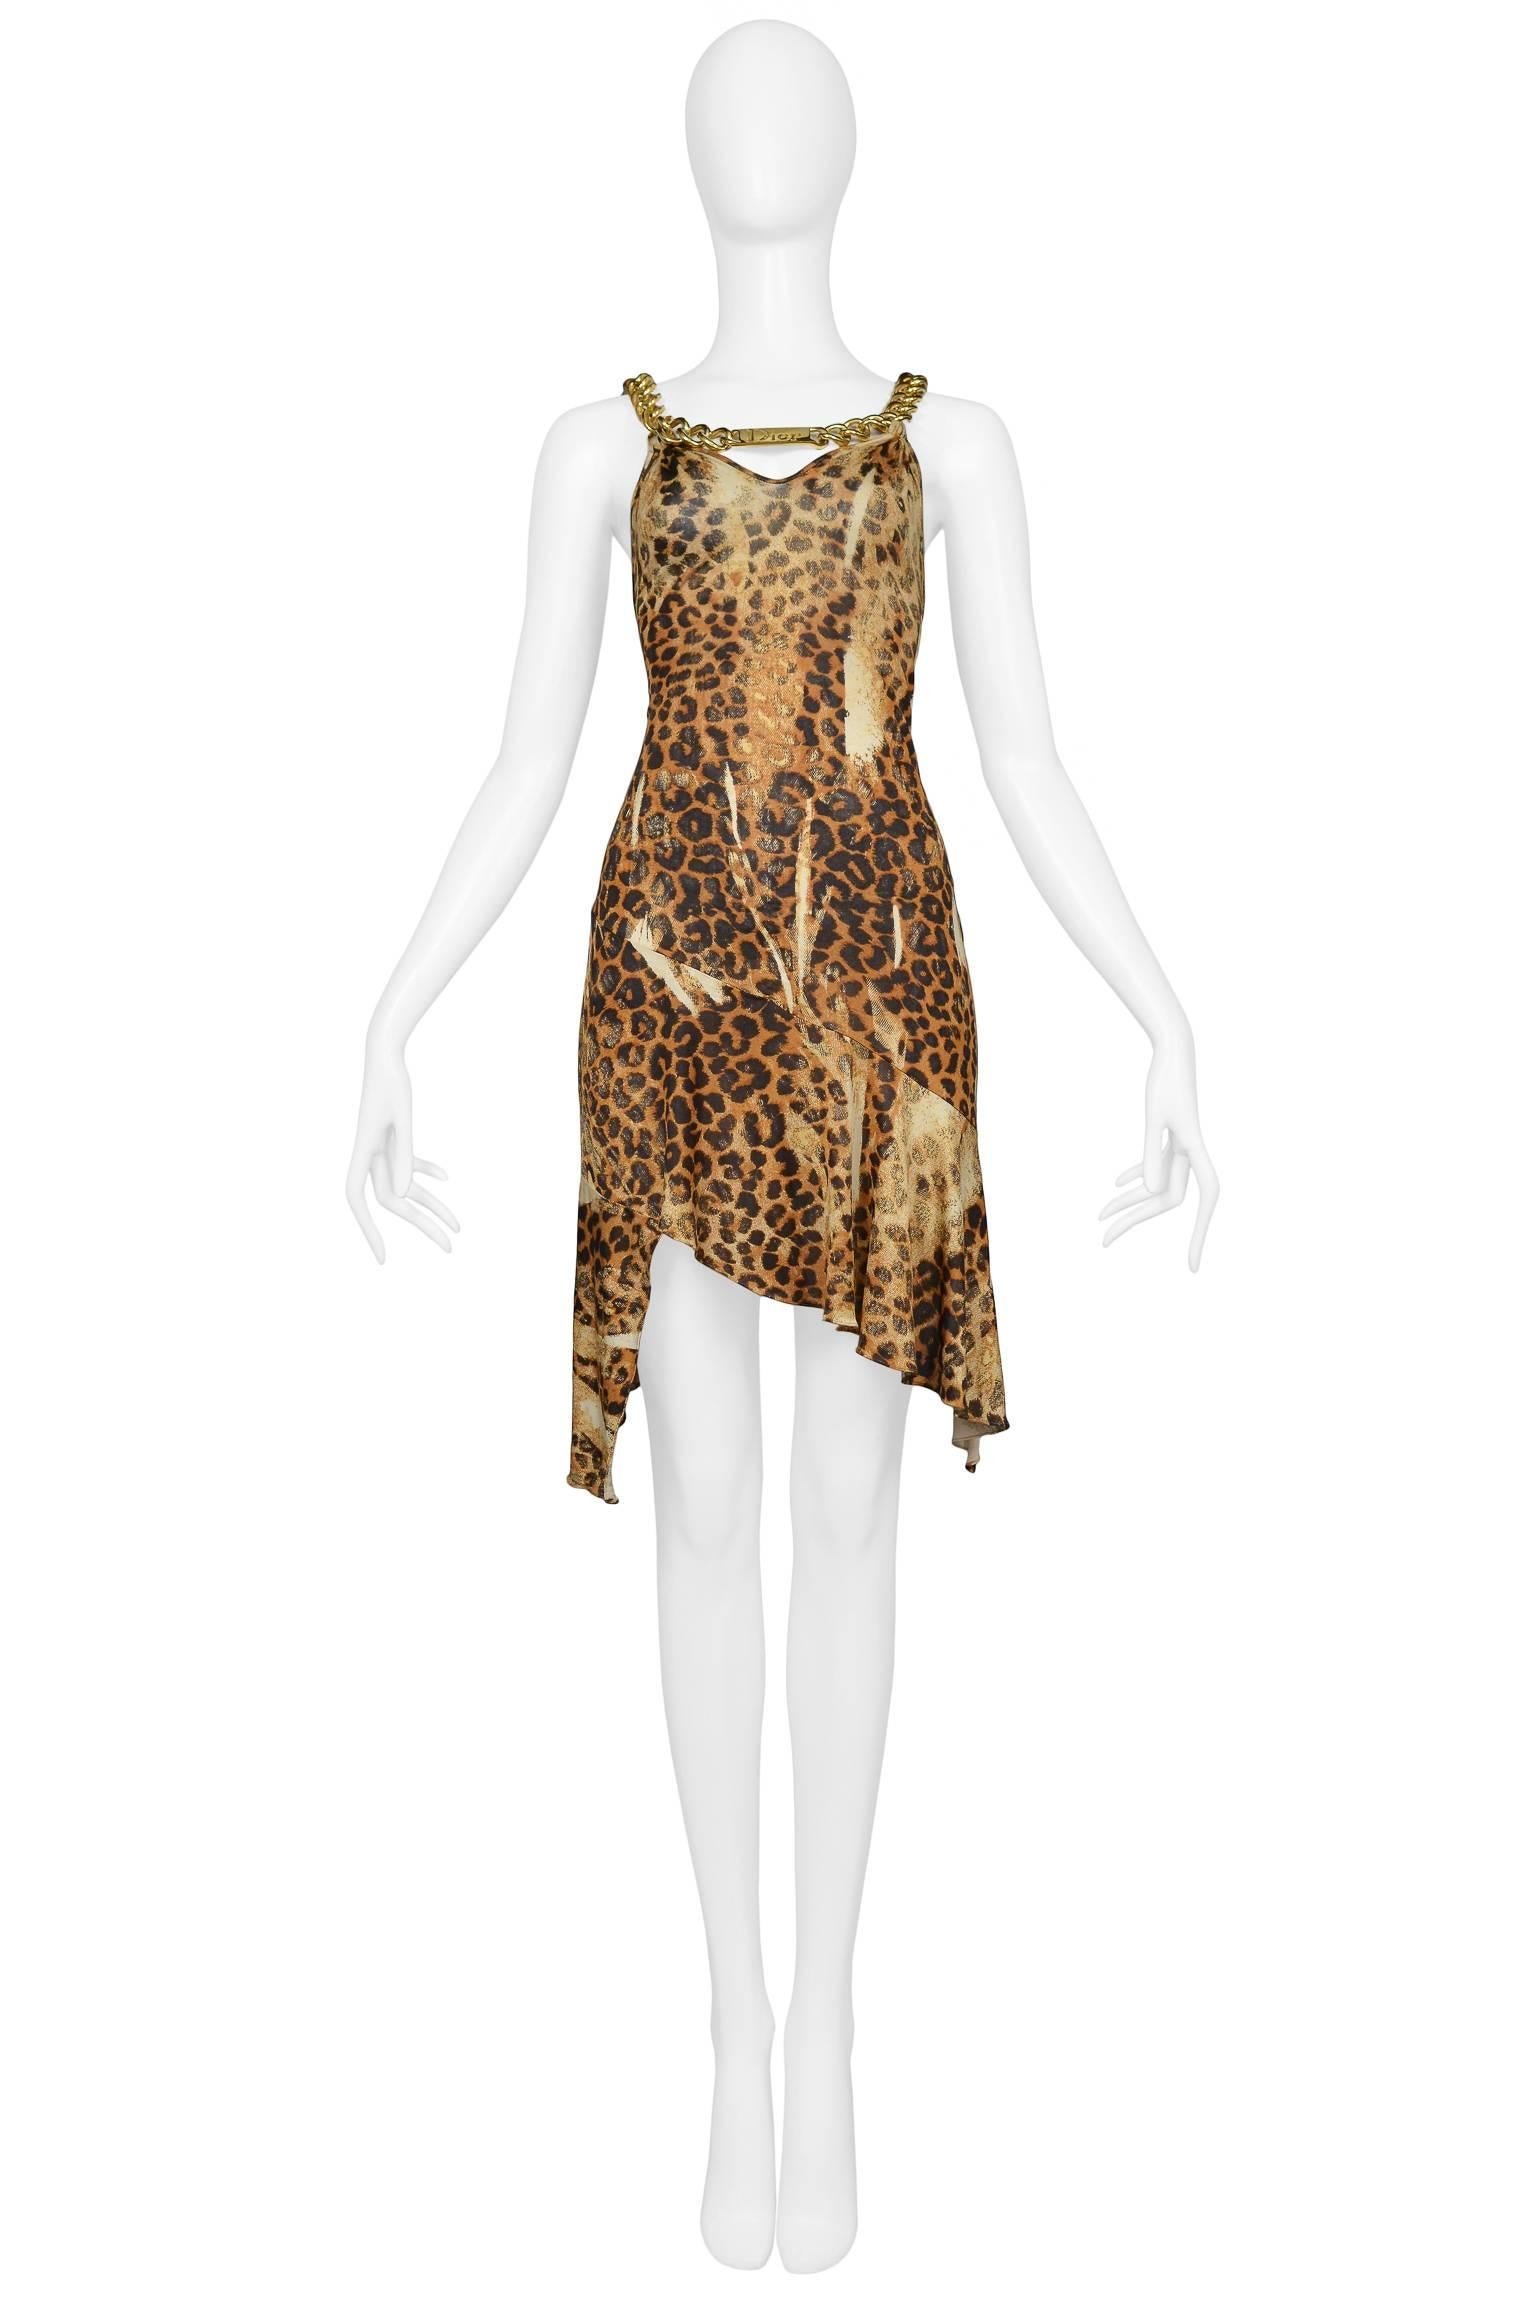 Iconic Christian Dior by John Galliano leopard print dress with gold tone oversized chunky chain necklace and straps, and DIOR ID charm. Plunging open back, keyhole front, and asymmetrical hem. Dress was featured on the runways and in advertising.